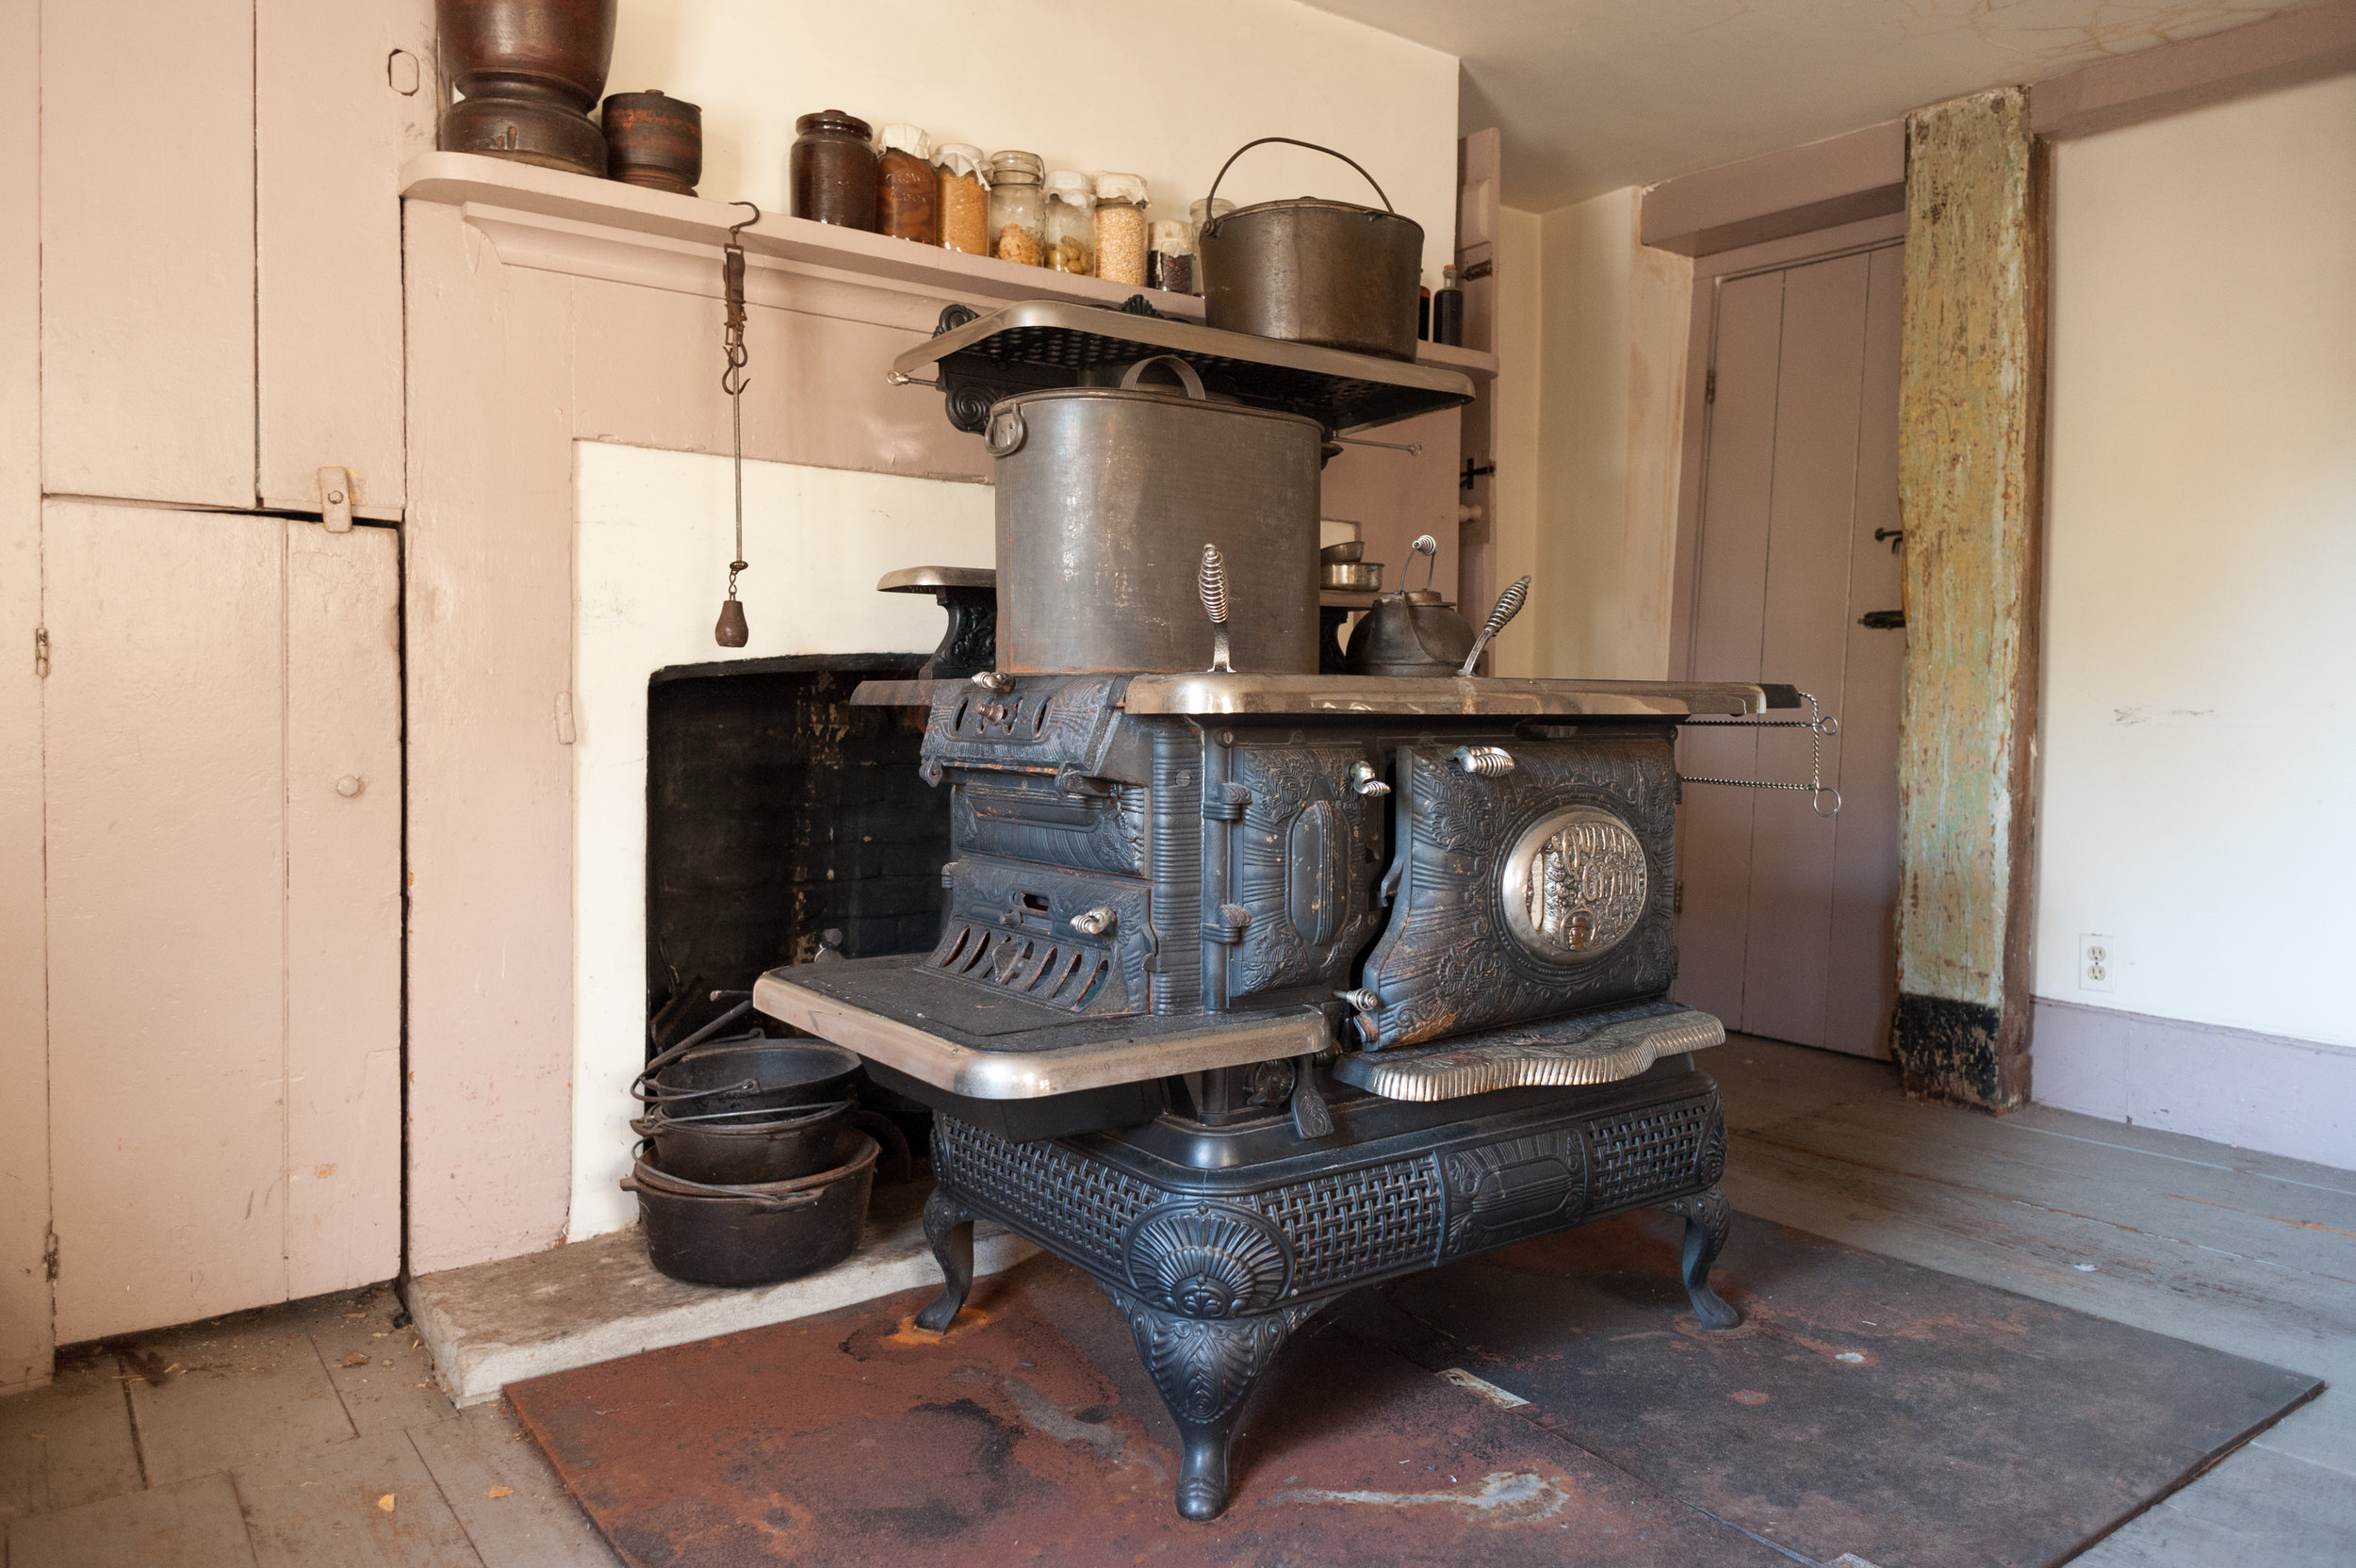 A cast iron wood burning stove was used for cooking and heating parts of the house. (Copy)